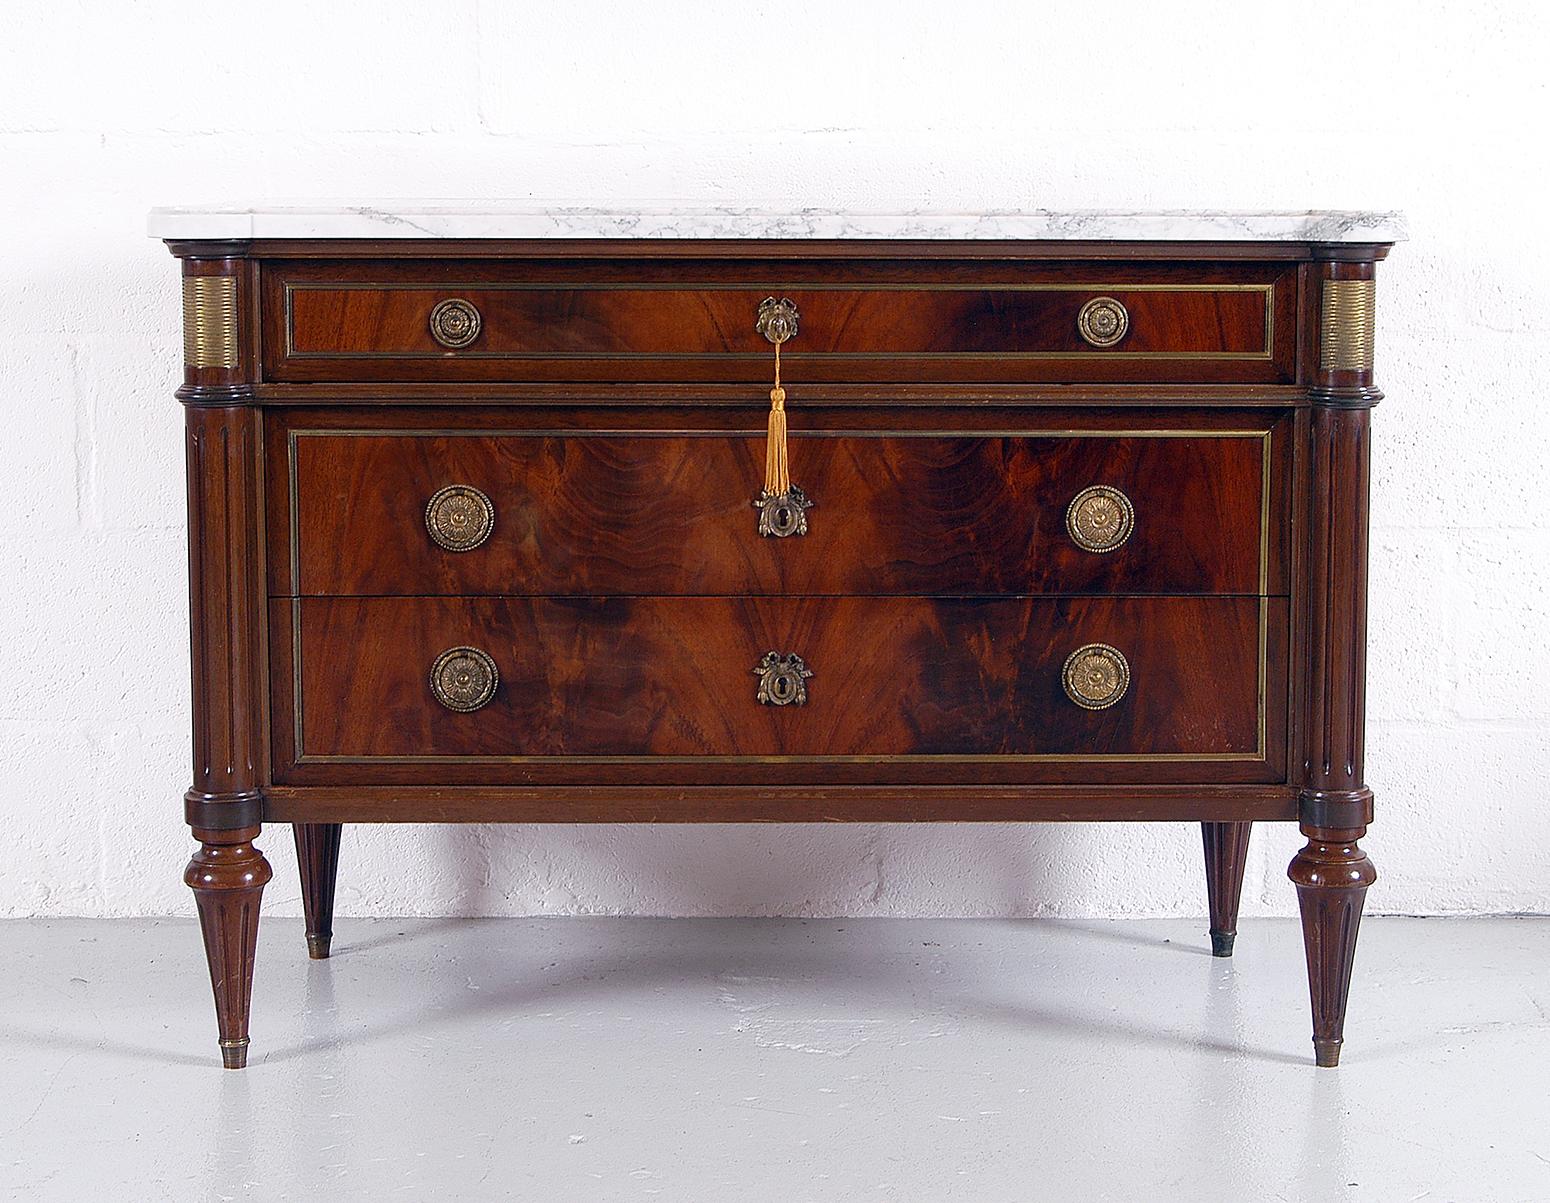 A lovely 20th century French walnut commode made in the Louis XVI style. 
The simple fielded drawers are edged with brass and fitted with brass drop ring pulls on backplates. Faux escutcheons on the bottom two drawers as only the top drawer is